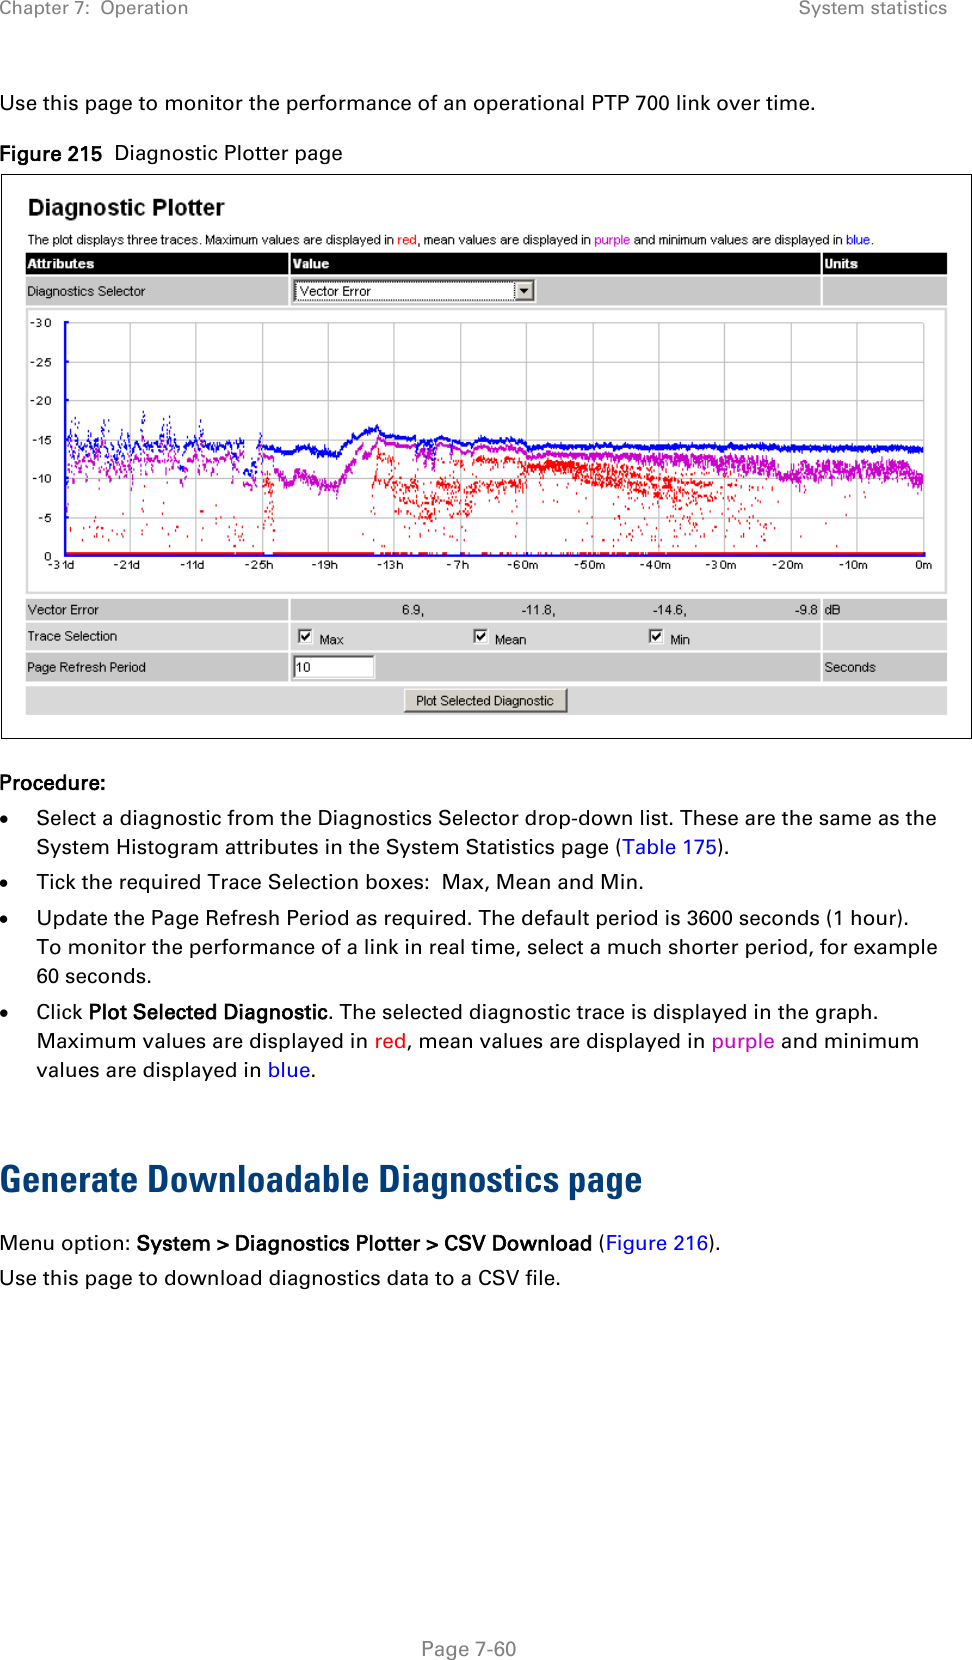 Chapter 7:  Operation System statistics  Use this page to monitor the performance of an operational PTP 700 link over time. Figure 215  Diagnostic Plotter page  Procedure: • Select a diagnostic from the Diagnostics Selector drop-down list. These are the same as the System Histogram attributes in the System Statistics page (Table 175). • Tick the required Trace Selection boxes:  Max, Mean and Min. • Update the Page Refresh Period as required. The default period is 3600 seconds (1 hour). To monitor the performance of a link in real time, select a much shorter period, for example 60 seconds. • Click Plot Selected Diagnostic. The selected diagnostic trace is displayed in the graph. Maximum values are displayed in red, mean values are displayed in purple and minimum values are displayed in blue.  Generate Downloadable Diagnostics page Menu option: System &gt; Diagnostics Plotter &gt; CSV Download (Figure 216). Use this page to download diagnostics data to a CSV file.  Page 7-60 